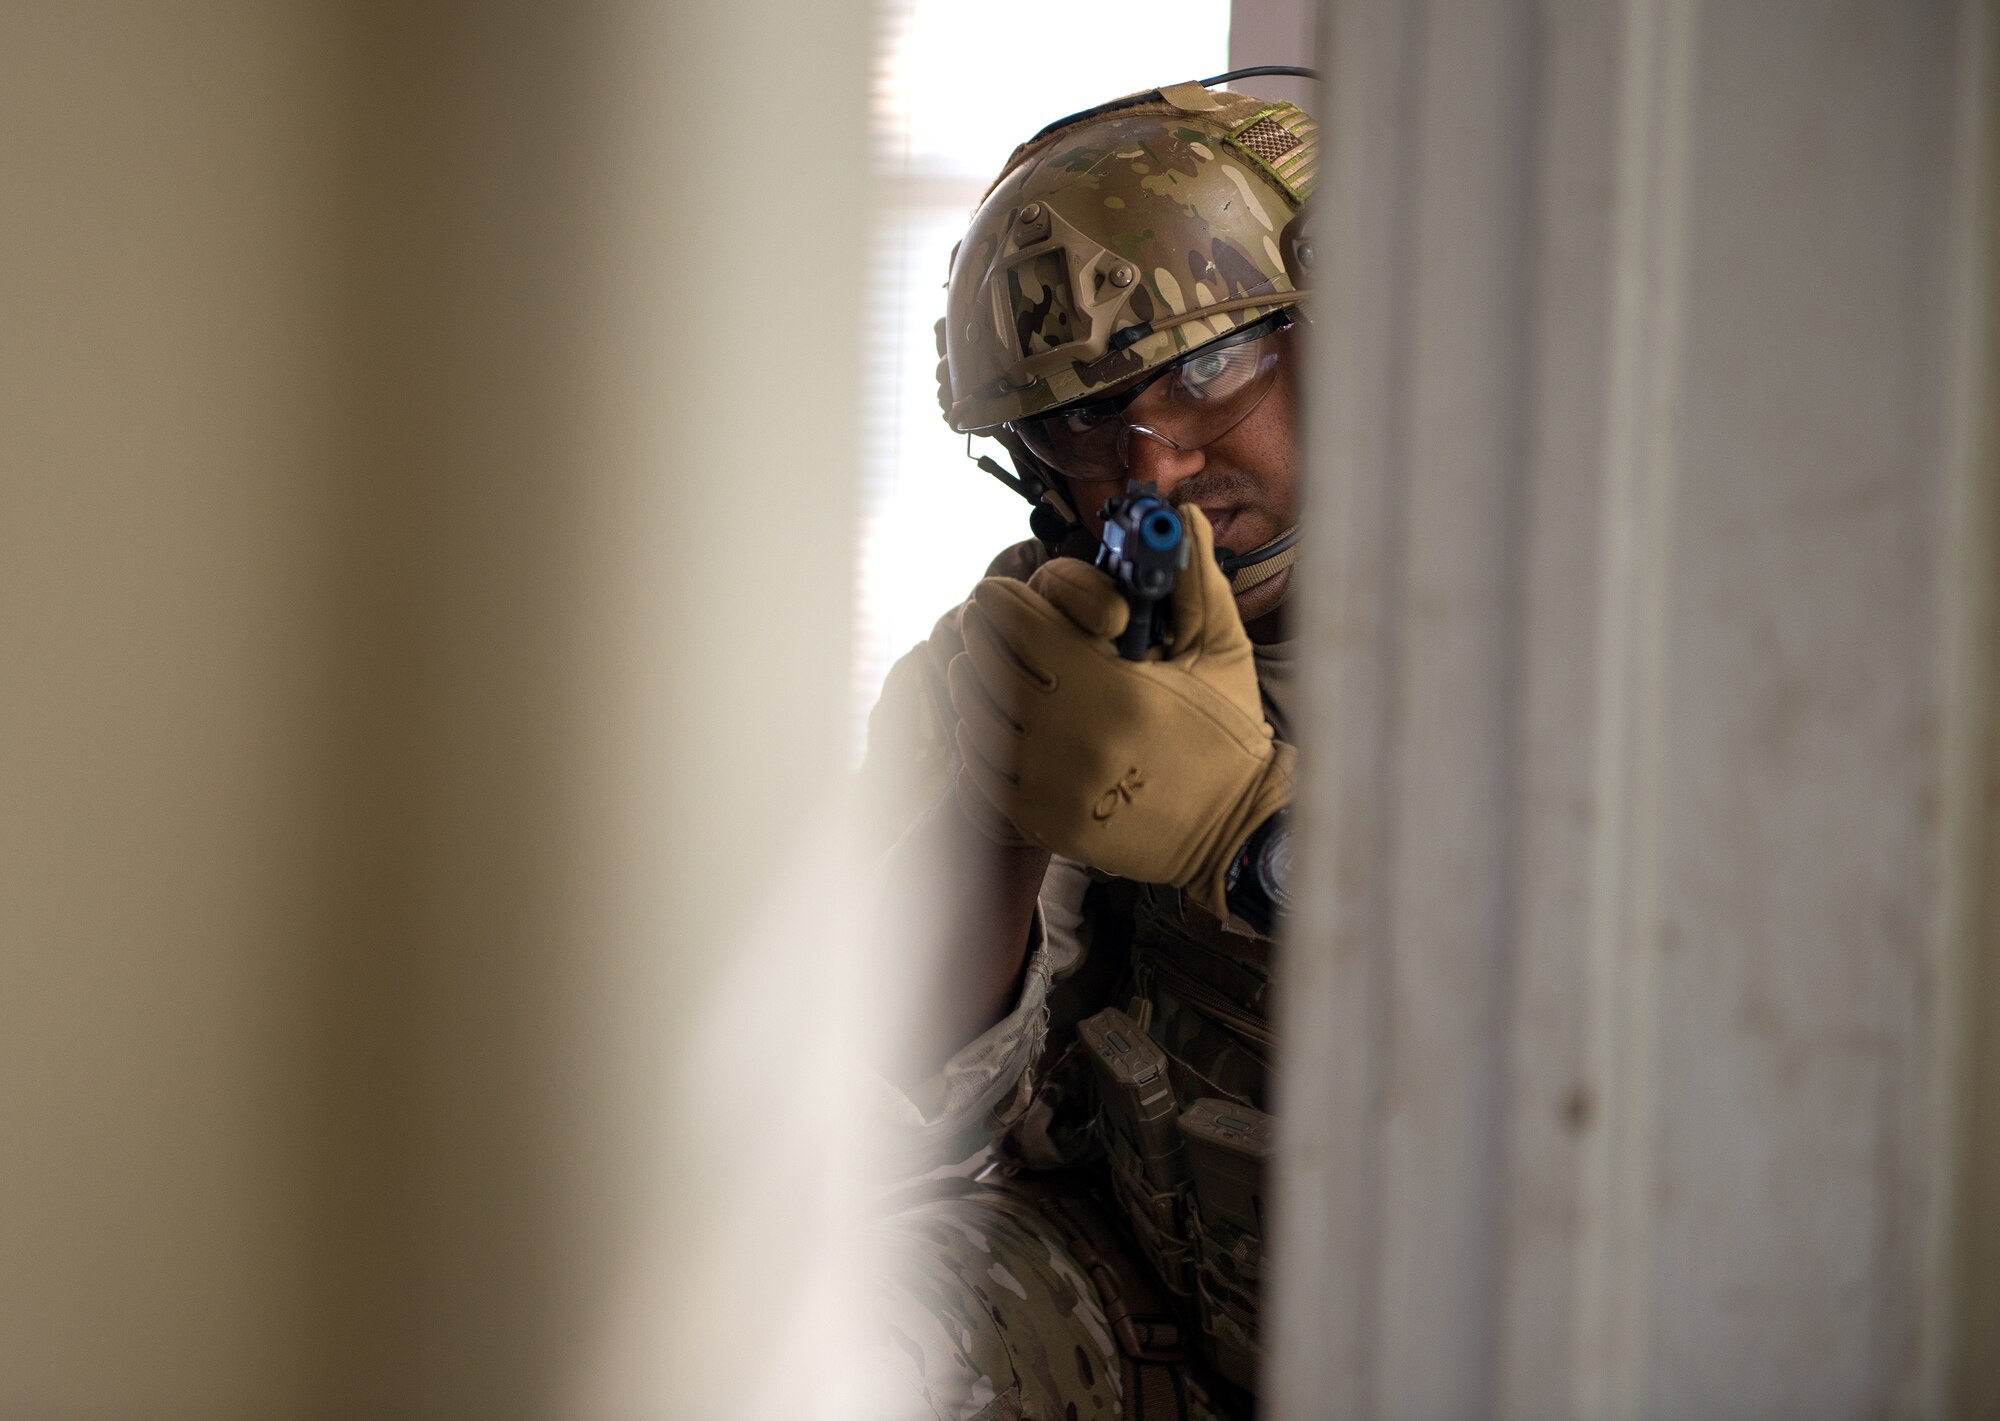 A 146th Air Support Operations Squadron Tactical Air Control Party Airman, from Will Rogers Air National Guard Base in Oklahoma City, aims a weapon through a doorway while clearing a structure at Southern Nazarene University in Bethany, Okla., during a Special Weapons and Tactics school held by the Oklahoma County Sheriff’s Office, Oct. 26 to Nov. 6, 2015. (U.S. Air National Guard photo by Master Sgt. Andrew M. LaMoreaux)